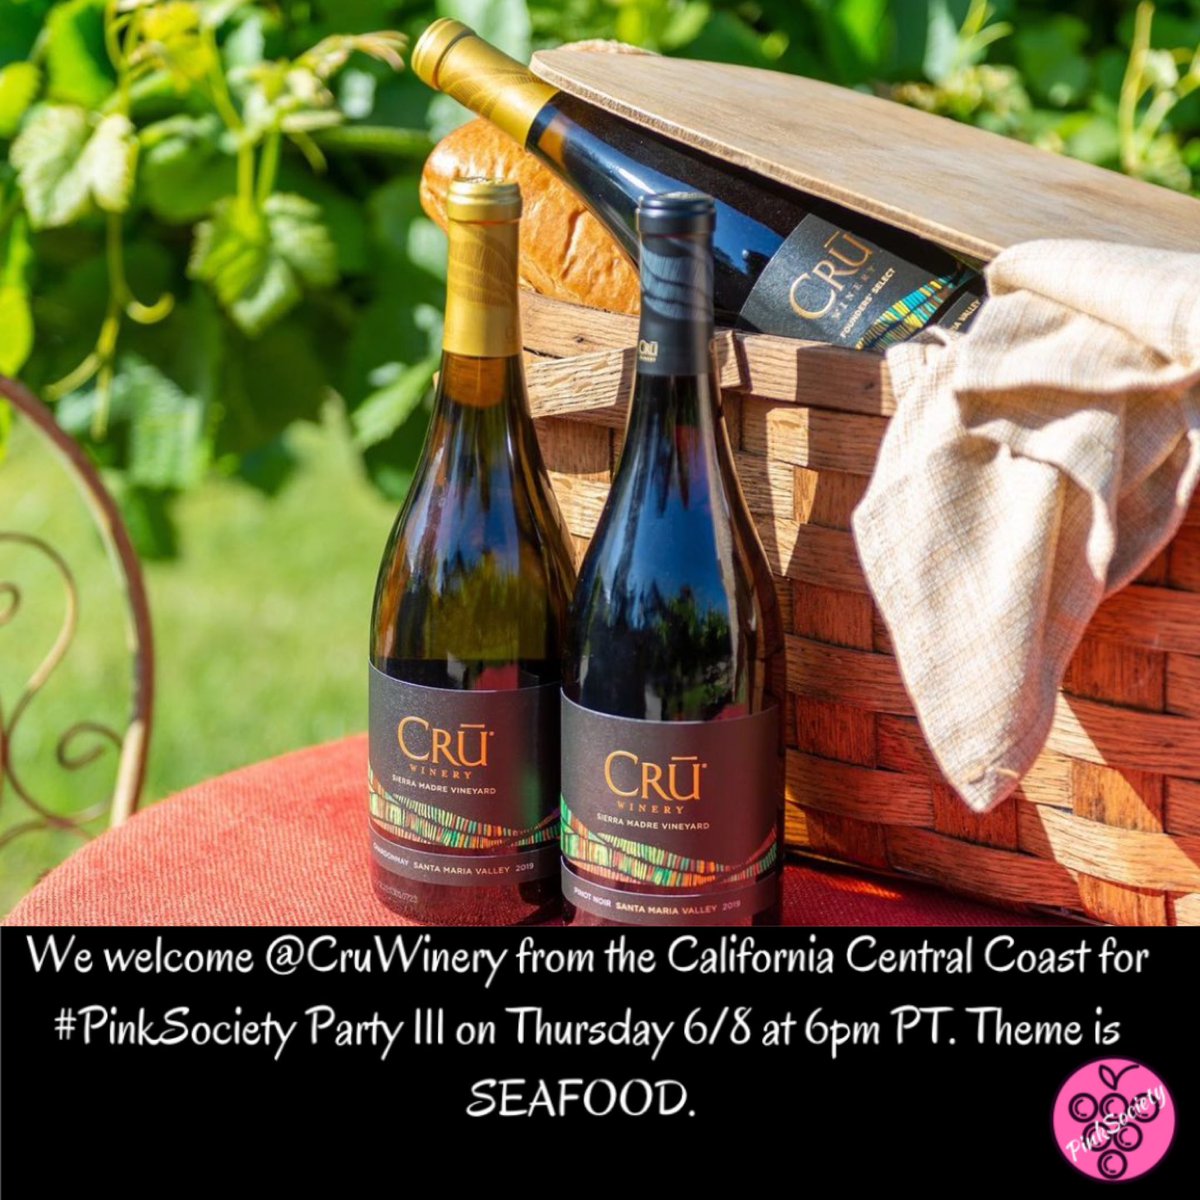 We welcome @CruWinery from the California Central Coast for #PinkSociety Party 111 on Thursday 6/8 at 6pm PT. Theme is SEAFOOD. @boozychef @jflorez @winedivaa @WineCheeseFri @RedWineCats @WineOnTheDime @G12Rocco @SustainableKW @DivaVinophile @amy_oosterhouse